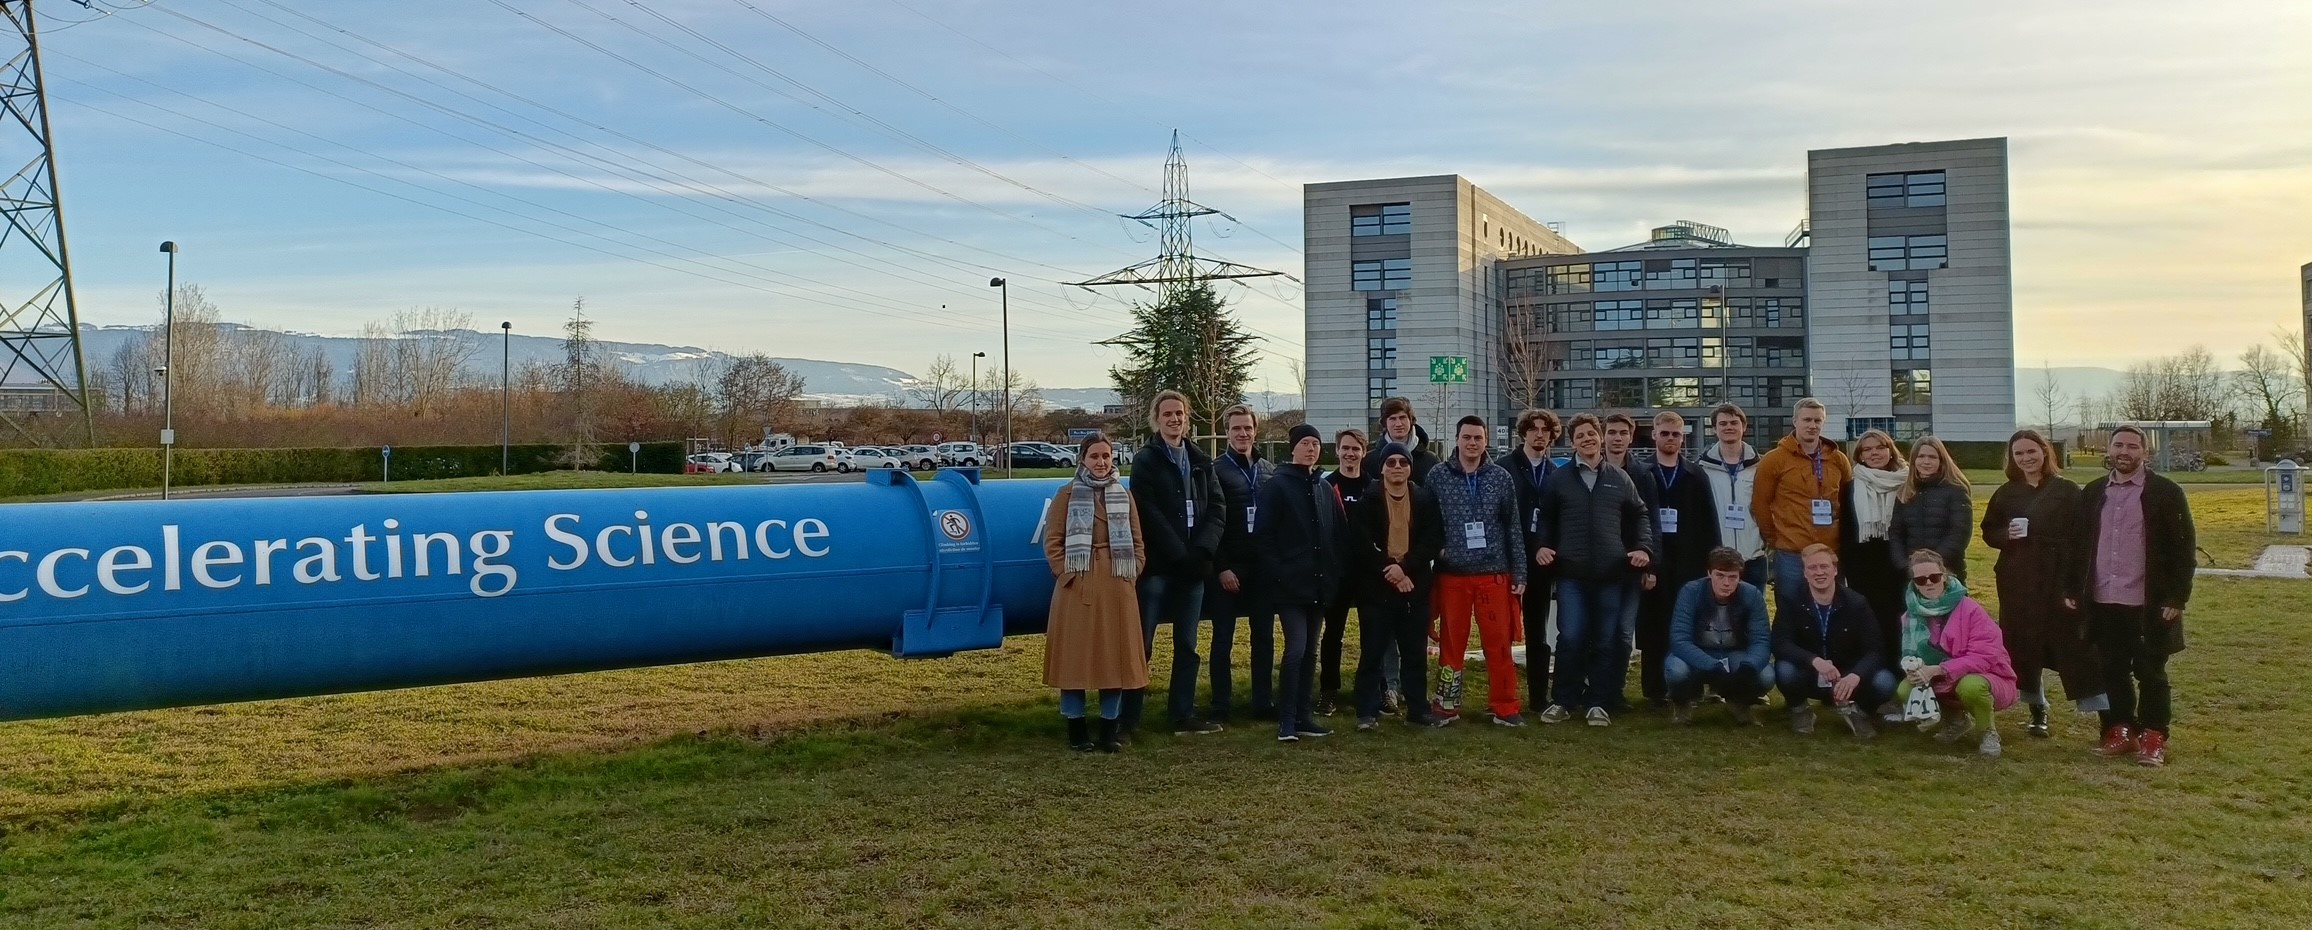 Visitors at CERN in fornt om blue pipe labeled "Accelerating Science".